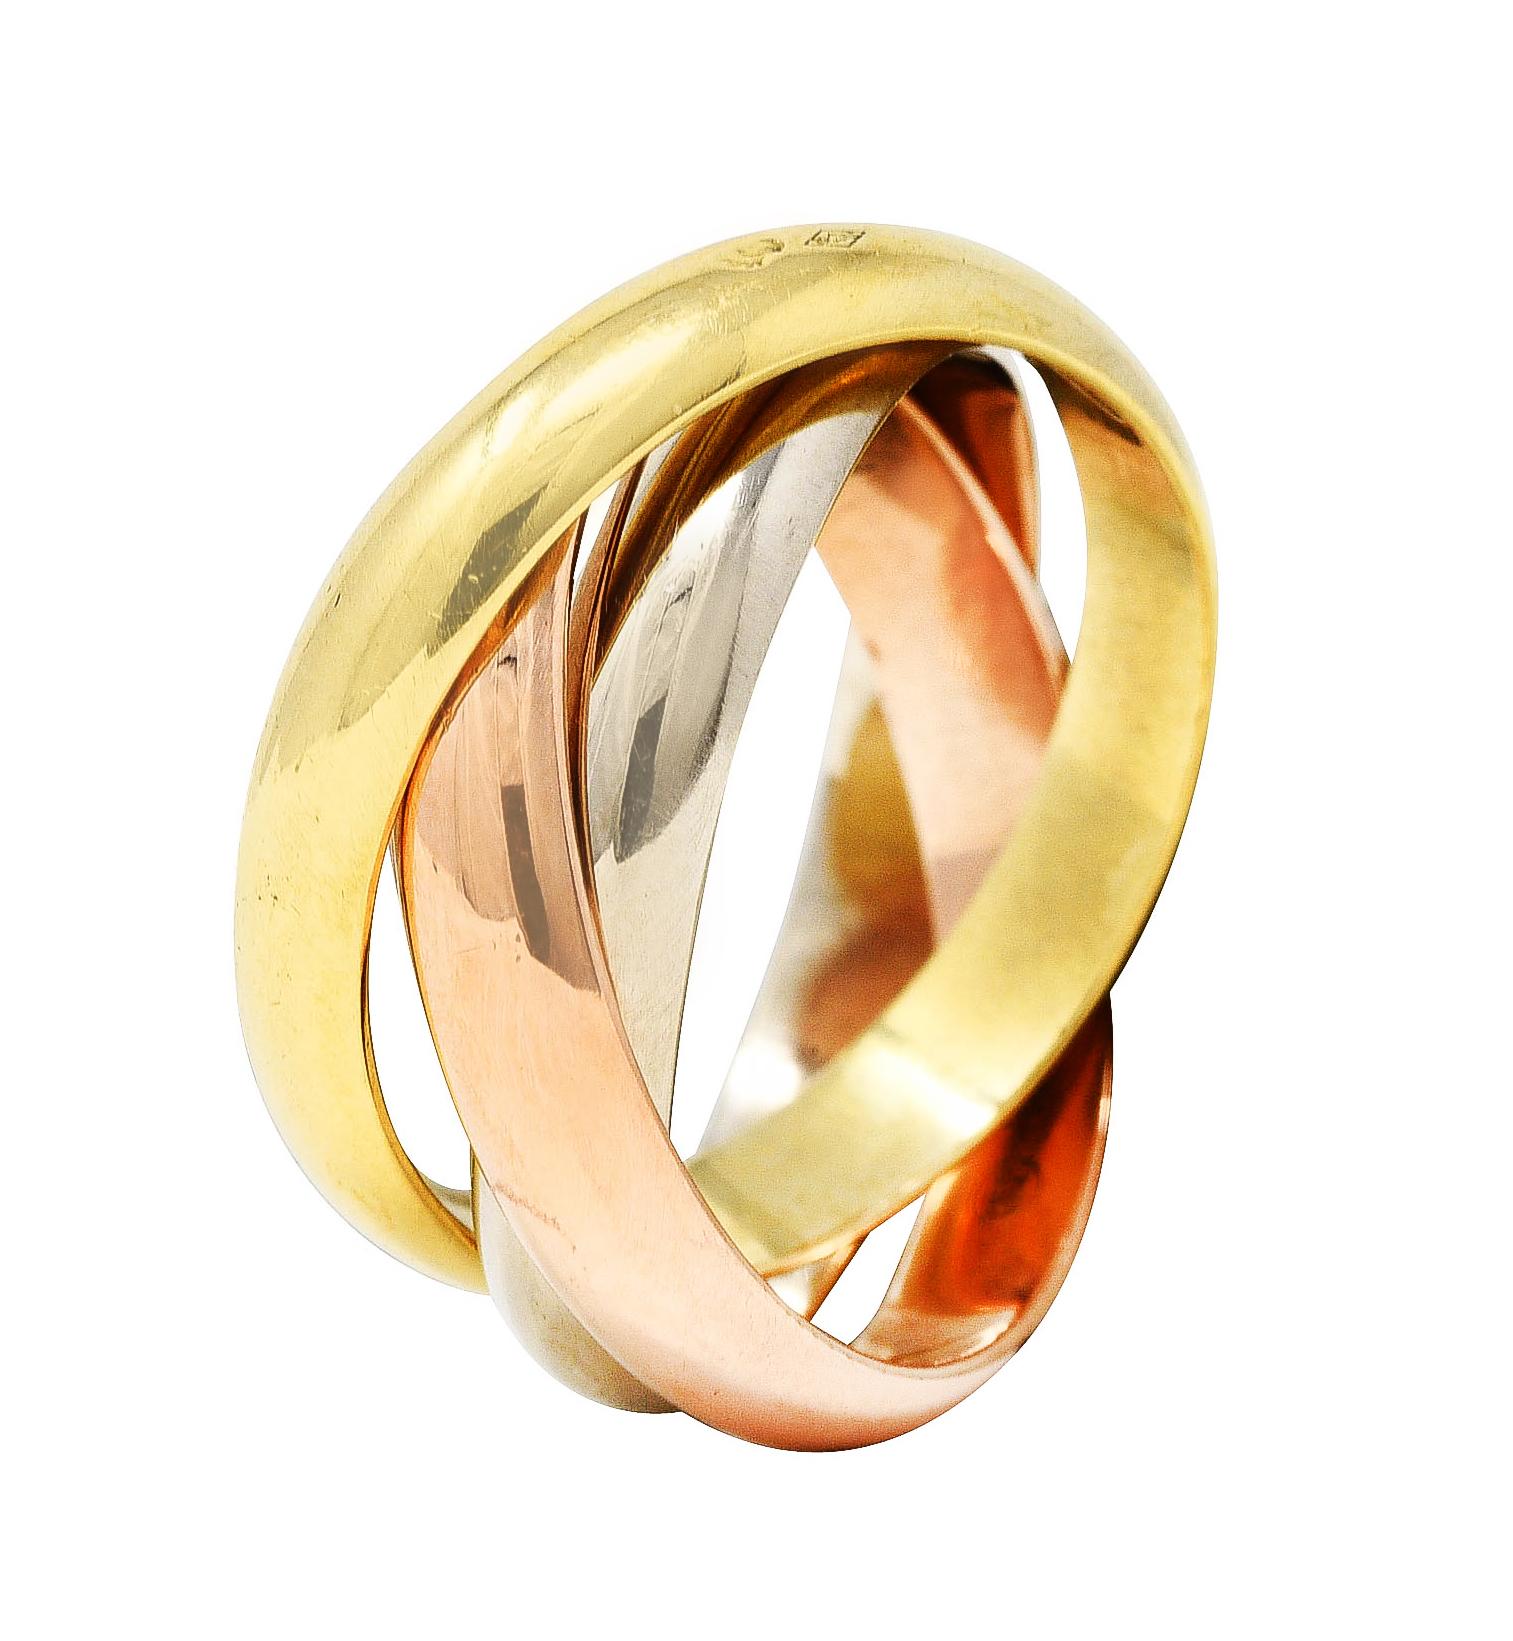 Ring is comprised of three interlocking bands of rose, white, and yellow gold

With high polished finish throughout

Stamped 750 with French assay mark for 18 karat gold

Numbered and fully signed Cartier

Circa: Stamped 1997 from the Trinity